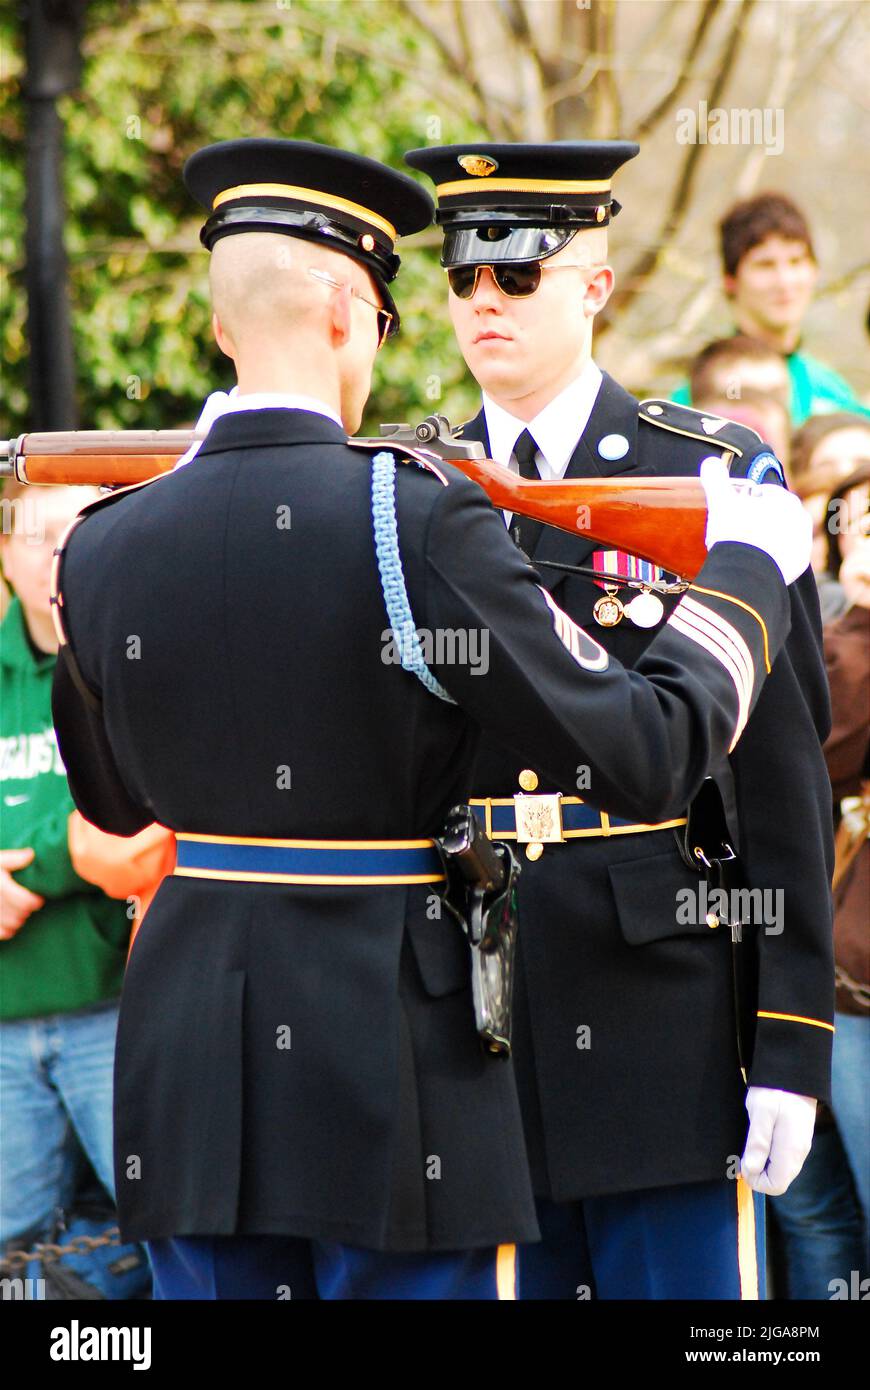 An honor guard at the Tomb of the Unknown Soldier at Arlington National Cemetery undergoes inspection prior to the changing of the guard ceremony Stock Photo